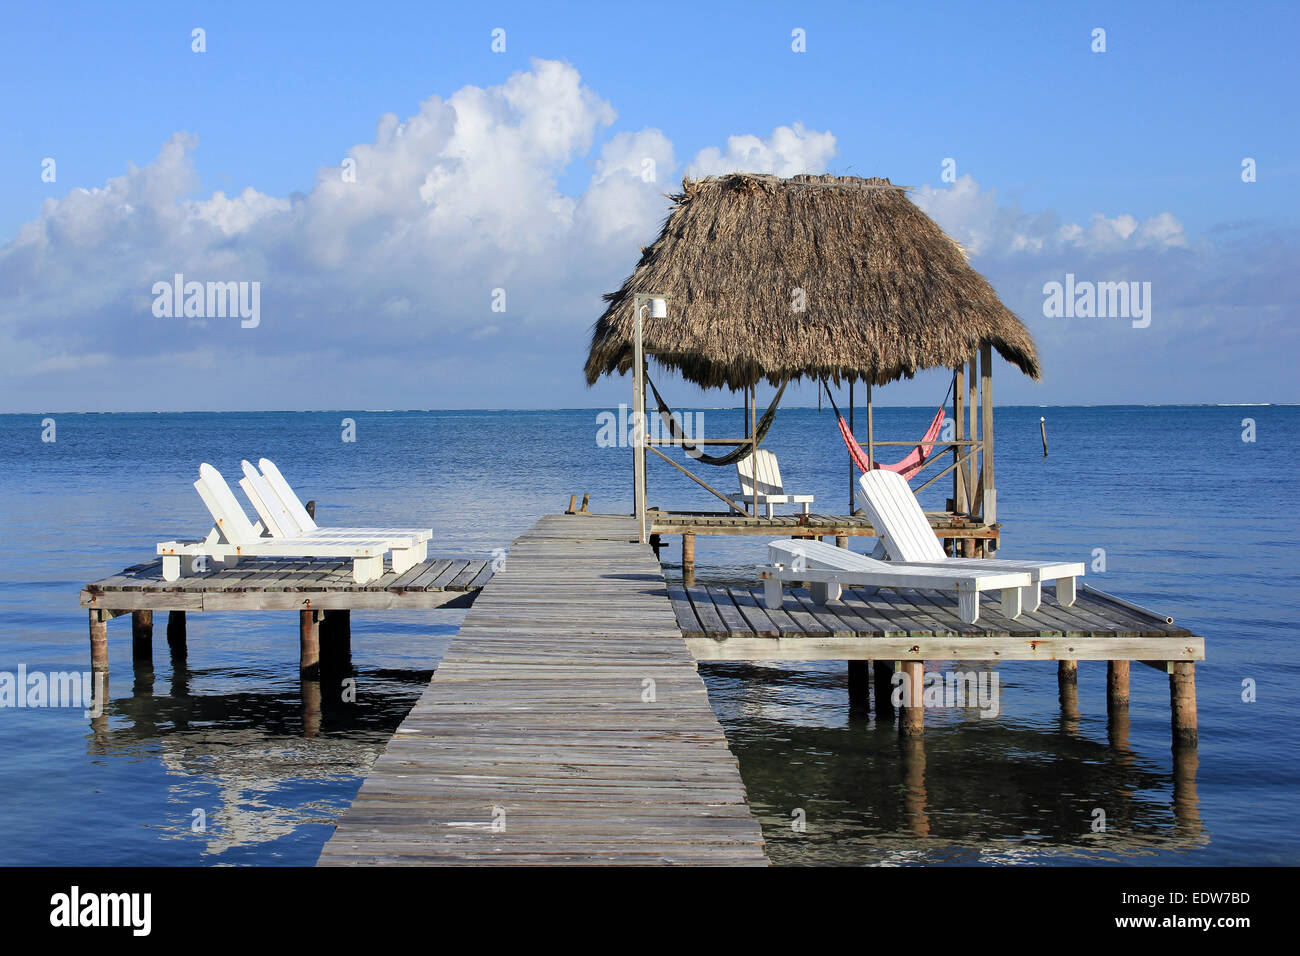 Wharf With Deckchairs On Caye Caulker, Belize Stock Photo